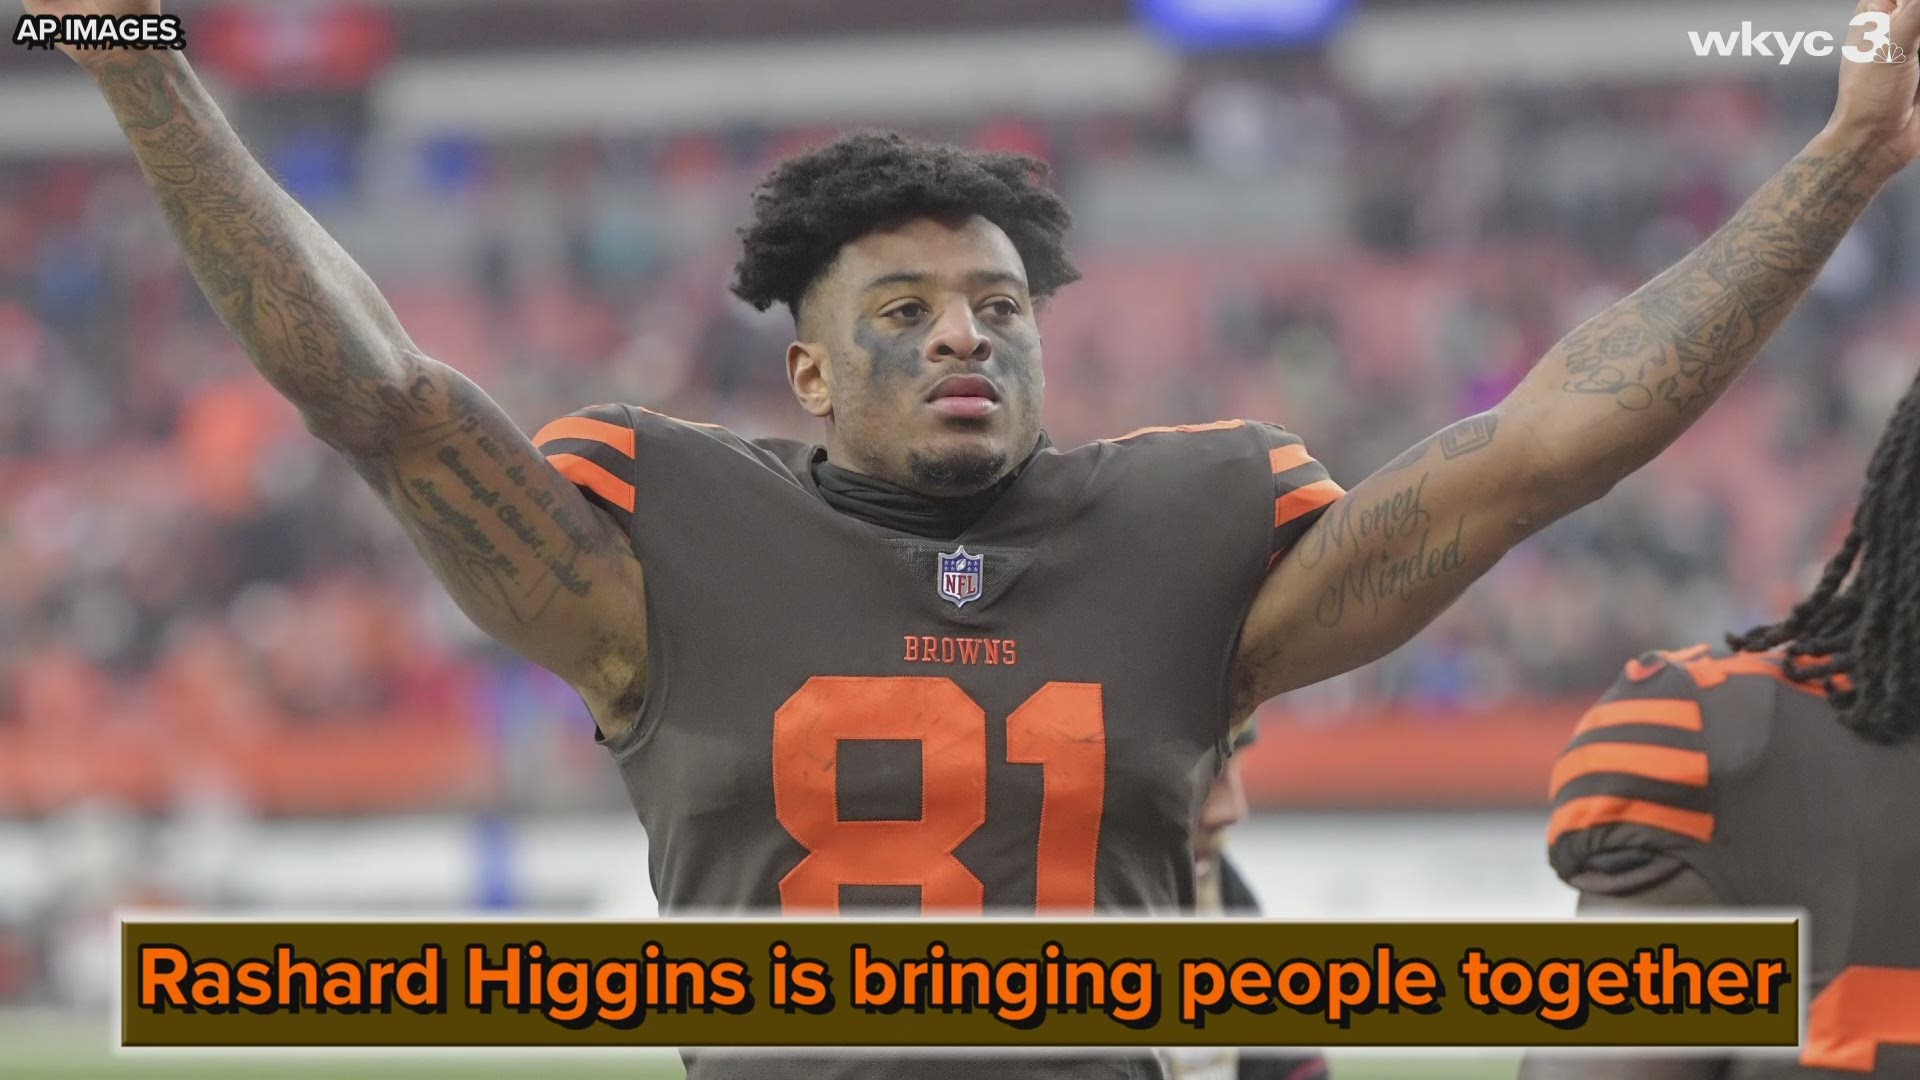 Cleveland Browns wide receiver Rashard Higgins is bringing the community together for the inaugural “Bowl with Hollywood” event at AMF Brookgate Lanes June 29.